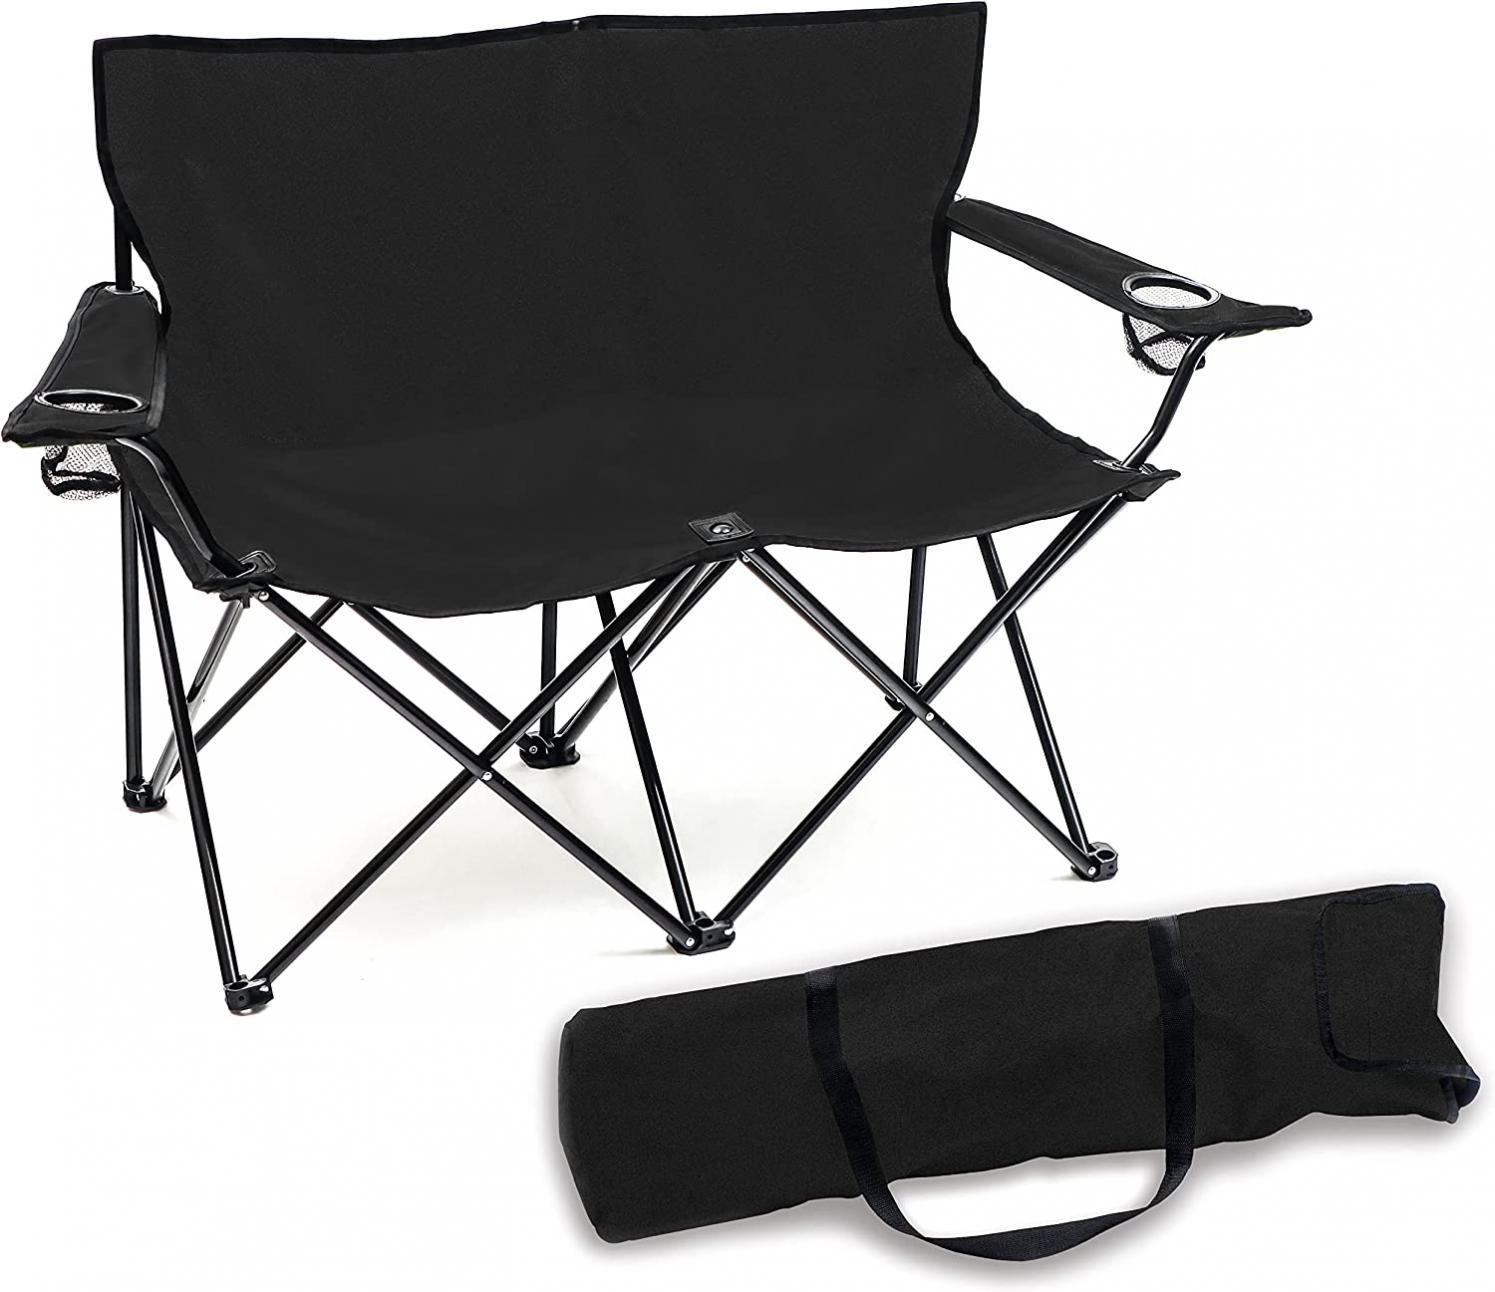 Trademark Innovations Loveseat Style Double Camp Chair, 40" L x 22" W x 31.5" H, Black